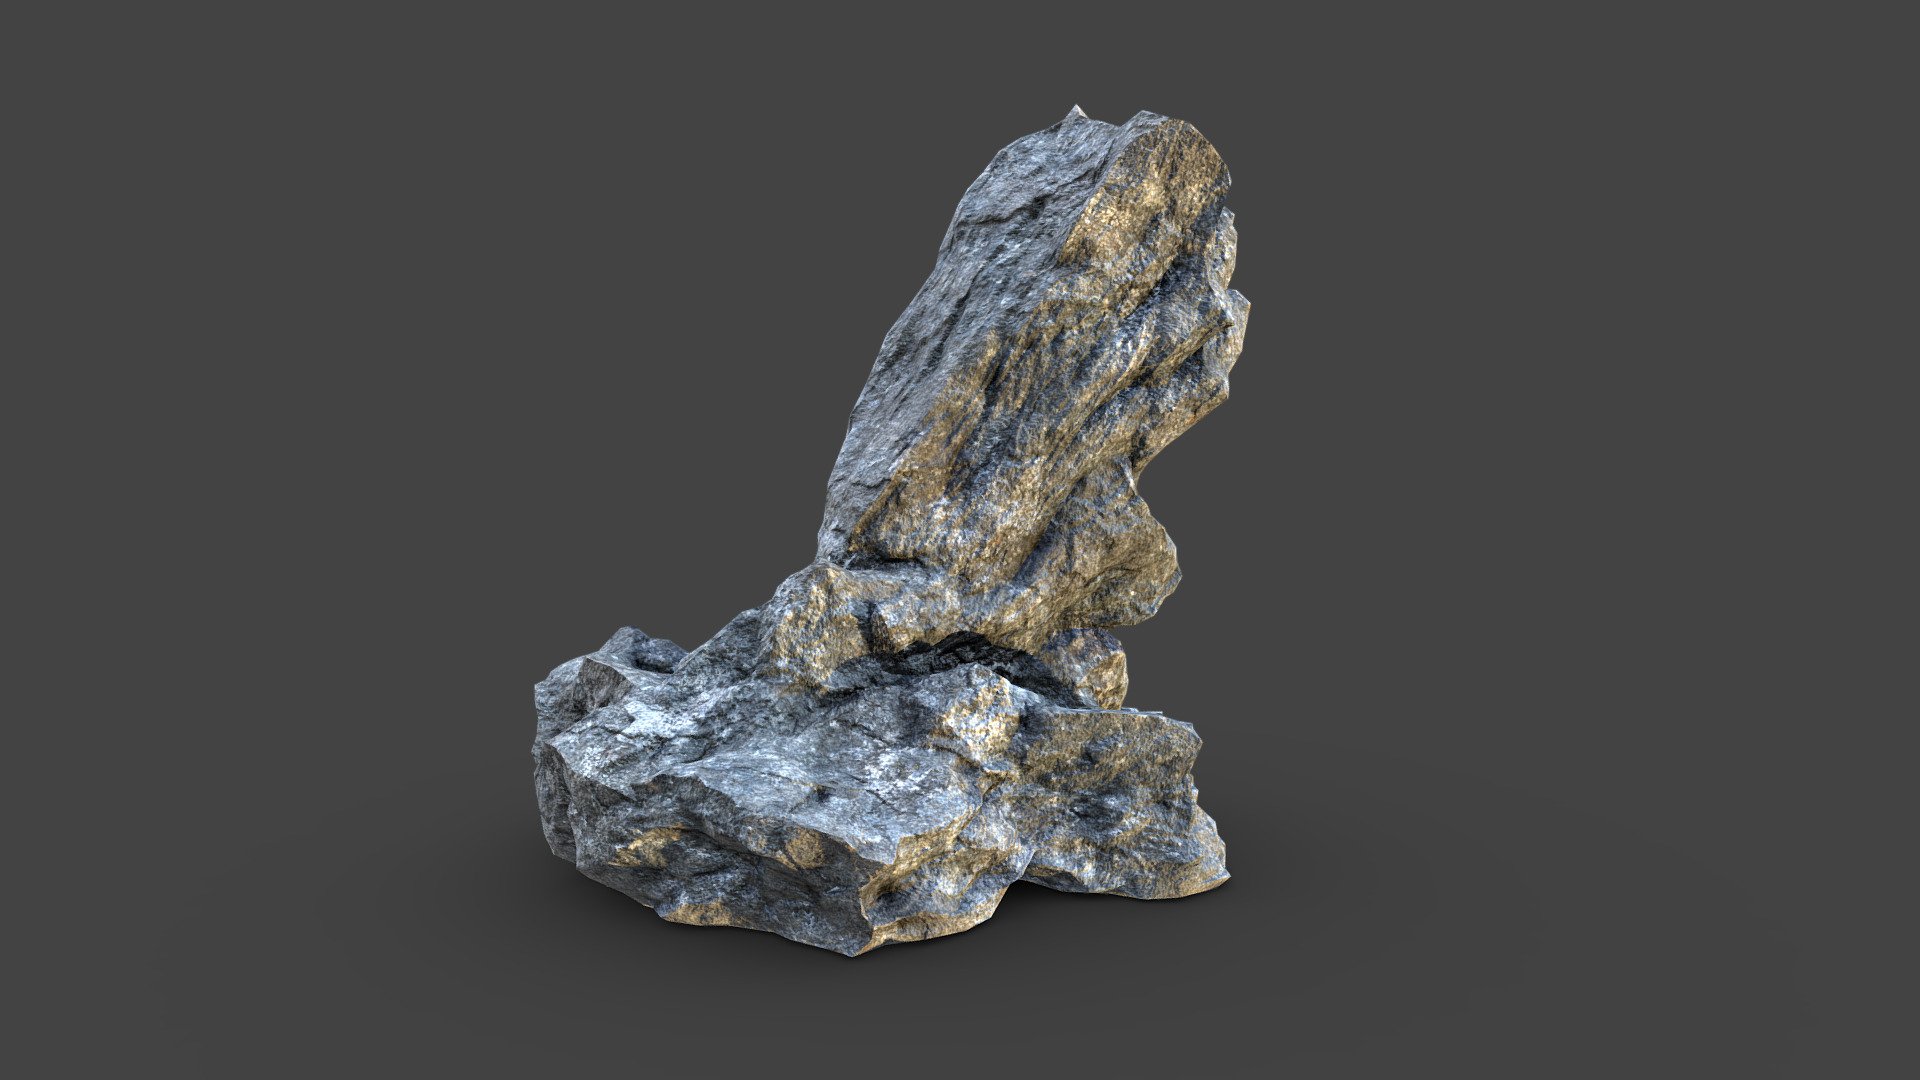 Rock 7_4 low poly

Topology: Tris

Polygon count: 4994

Vertices count: 2499

Textures: Diffuse, Normal, Specular, Glossiness, Curvature, Height, Ambient Occlusion ( all in 4k resolution)

UV mapped with non-overlapping

All files are zipped in one folder. Contains 3 file formats obj, ma &amp; fbx

Useful for games, renders, background scenes and other graphical projects 3d model